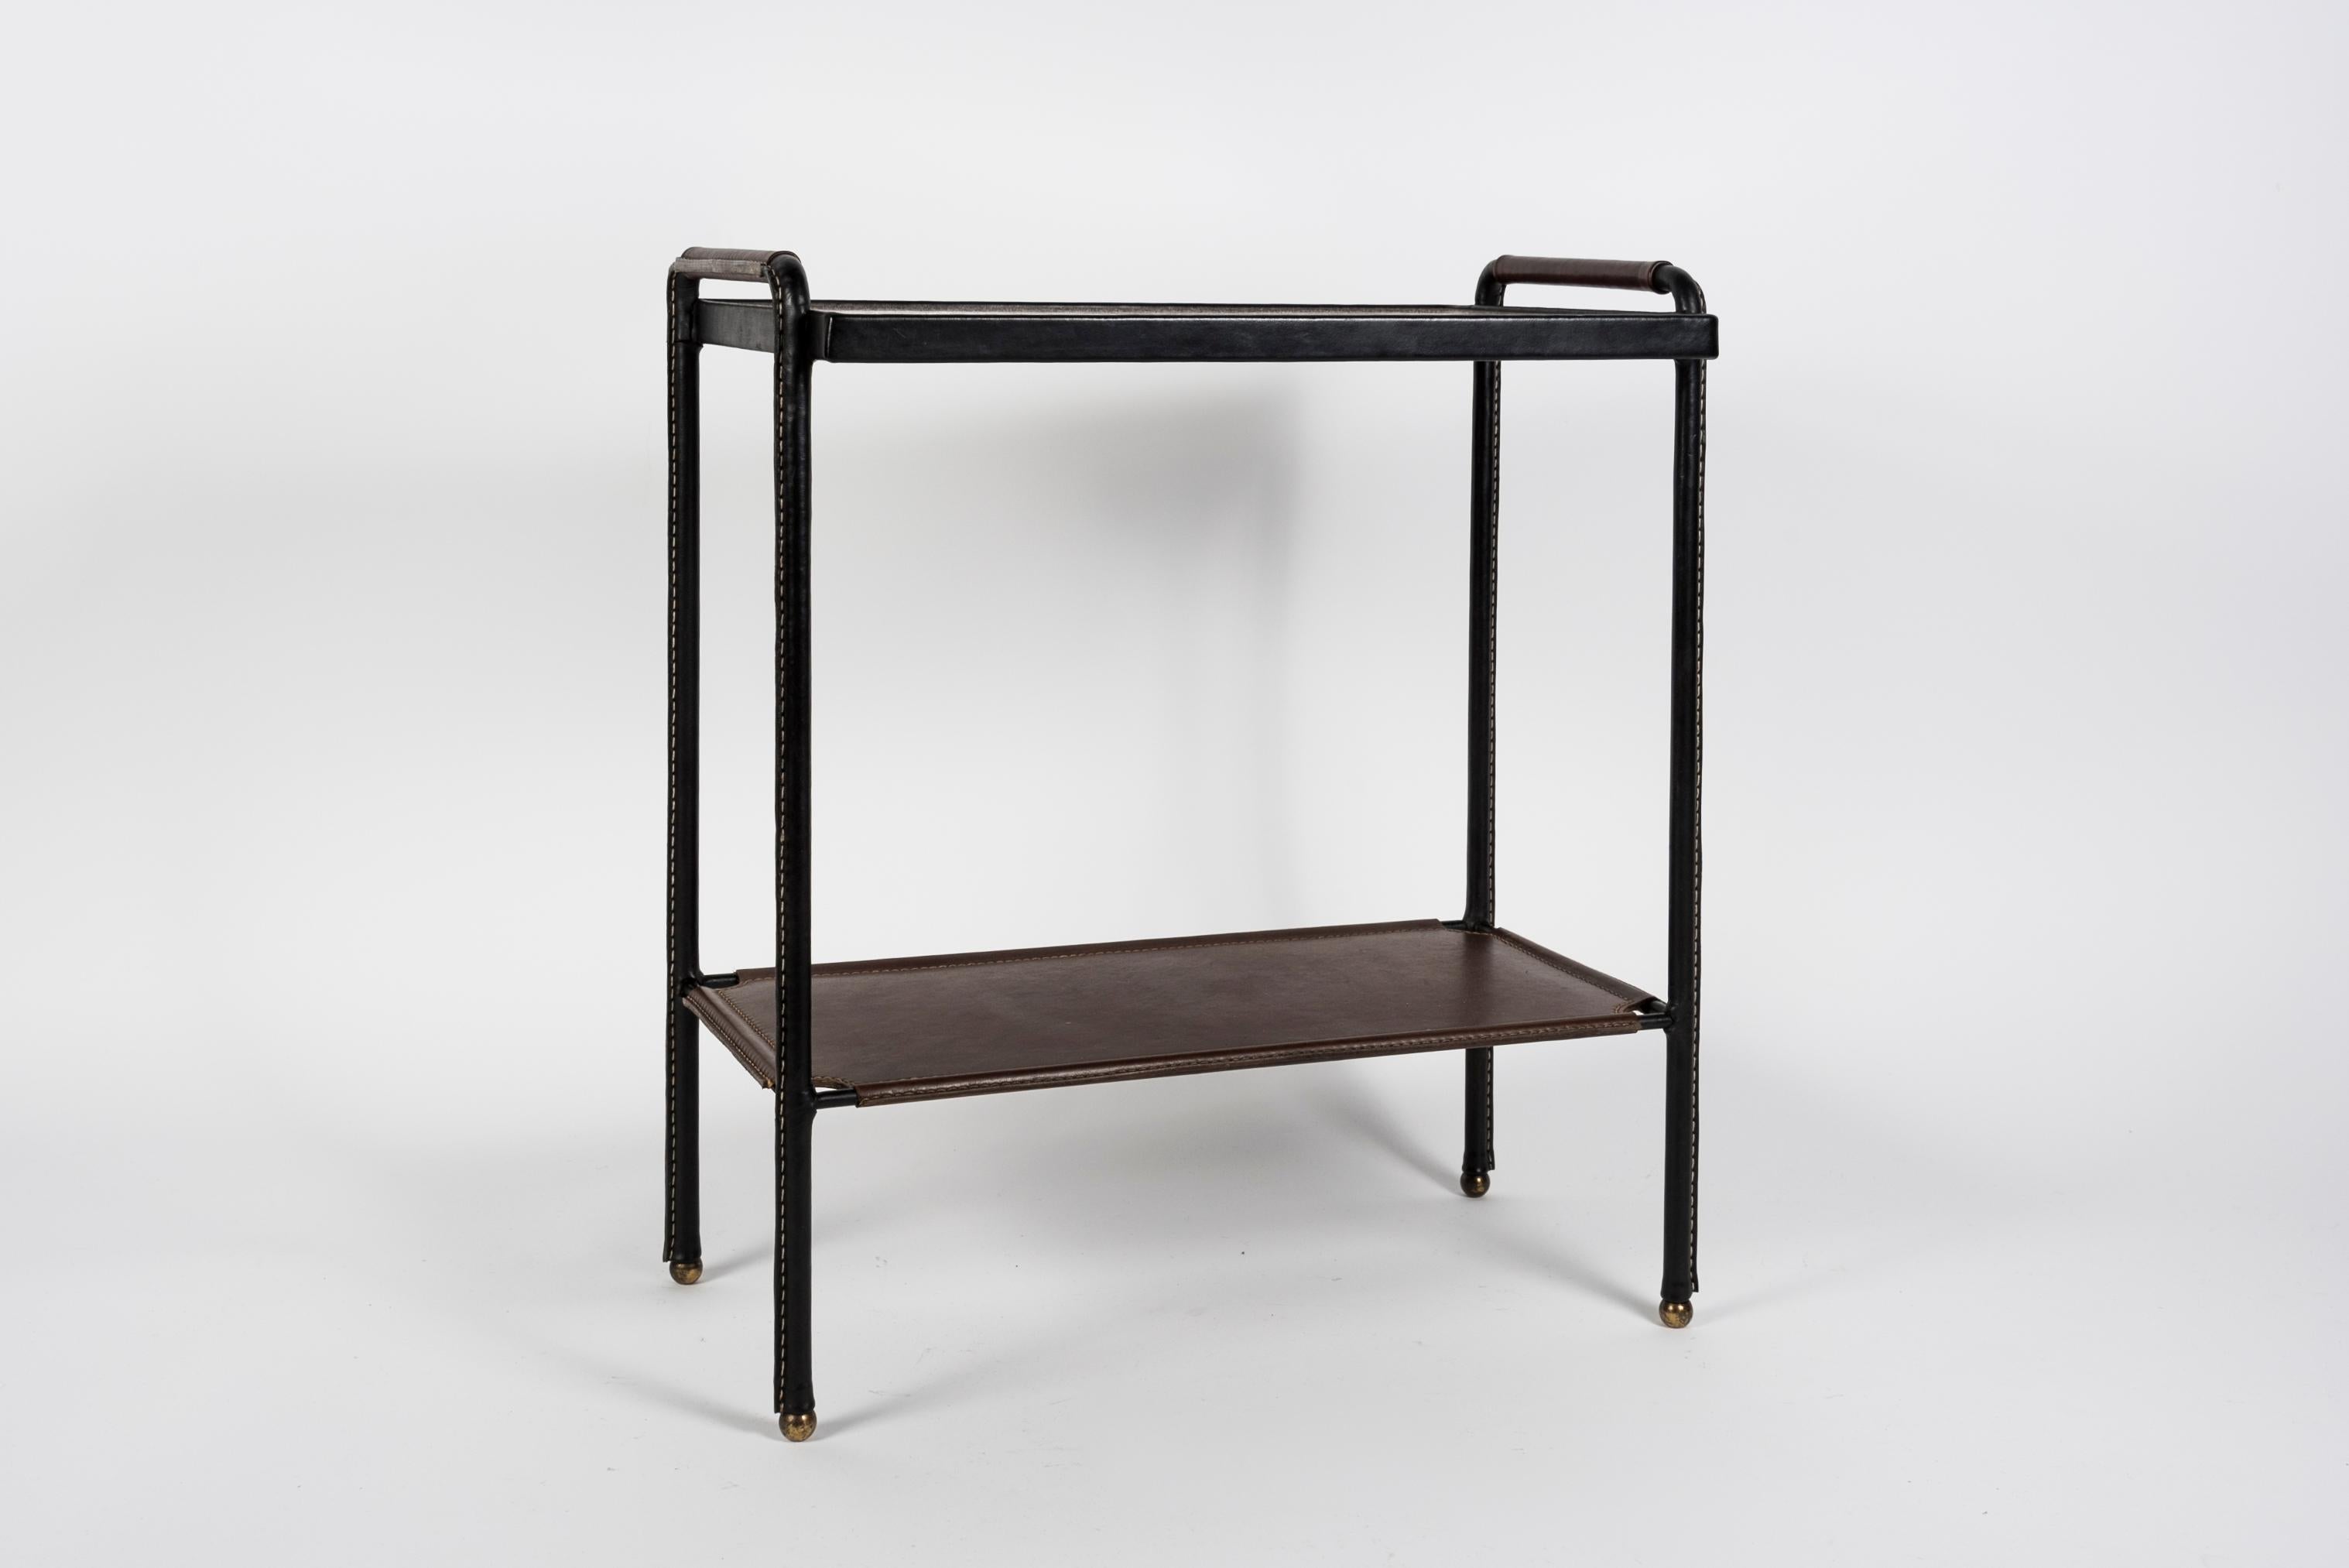 European 1950's Stiitched leather side table by Jacques Adnet